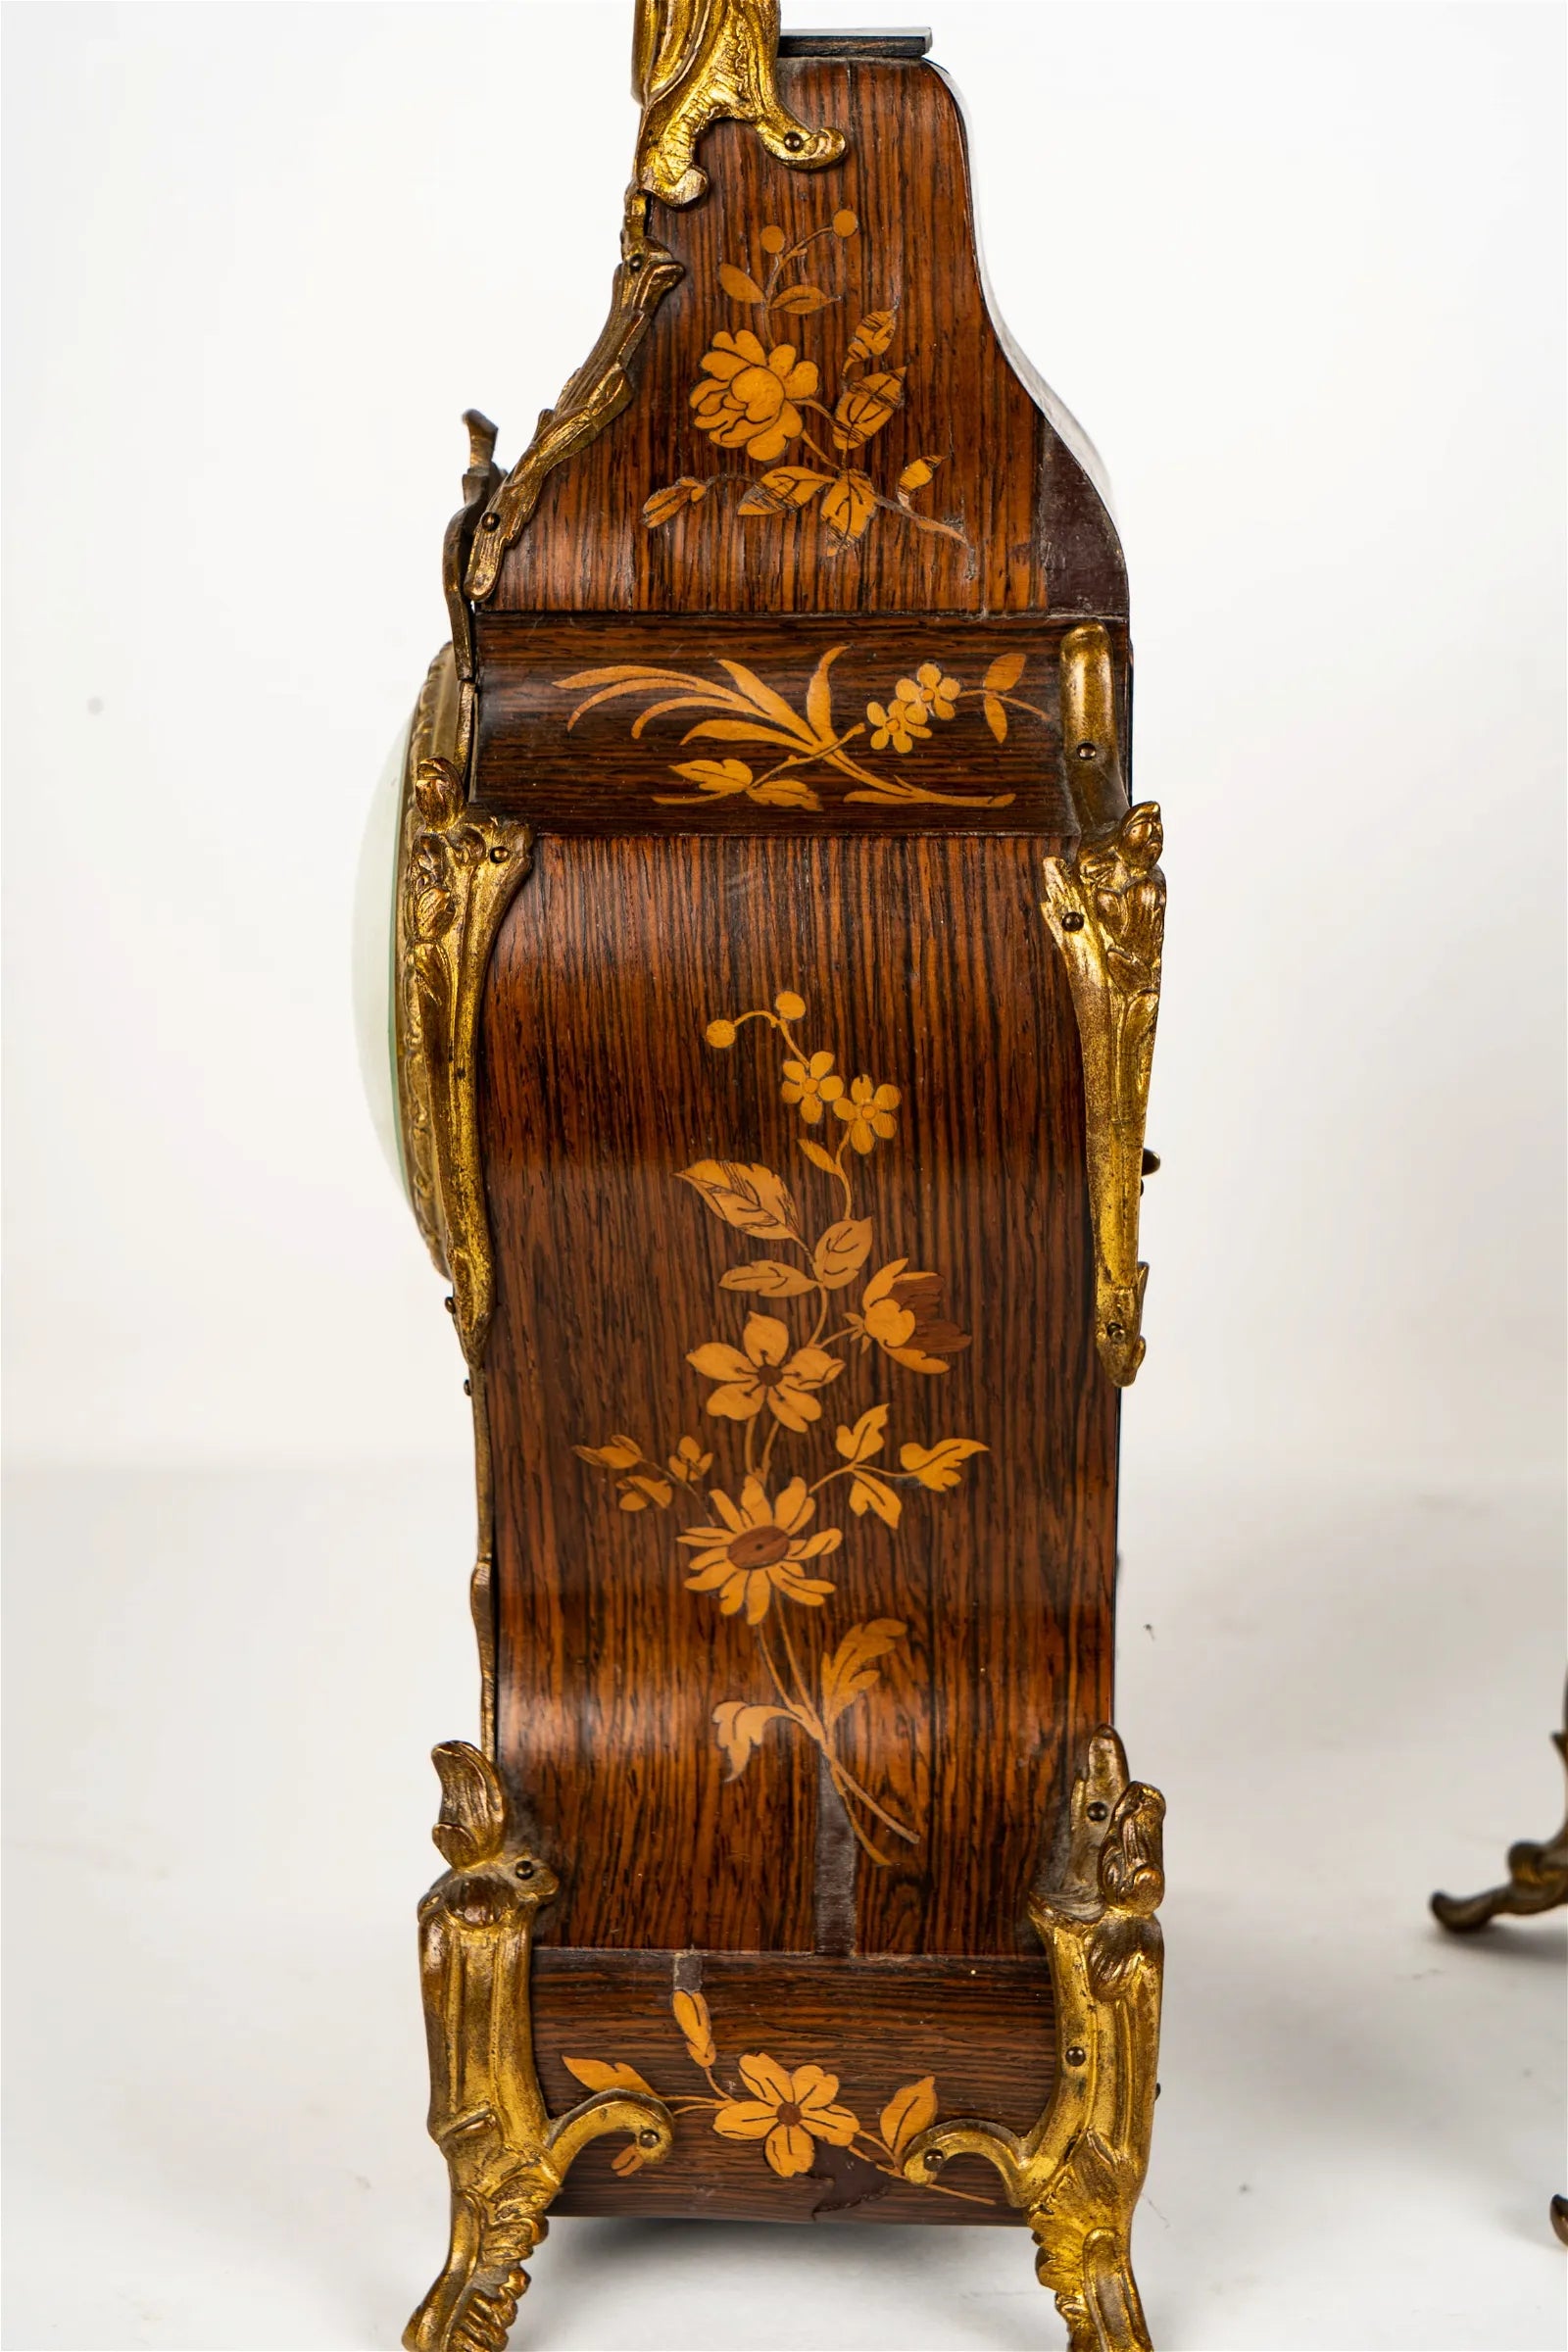 TK2-030: Early19th Century French Louis XV Style Mantle Clock With Mixed Wood Marquetry Case